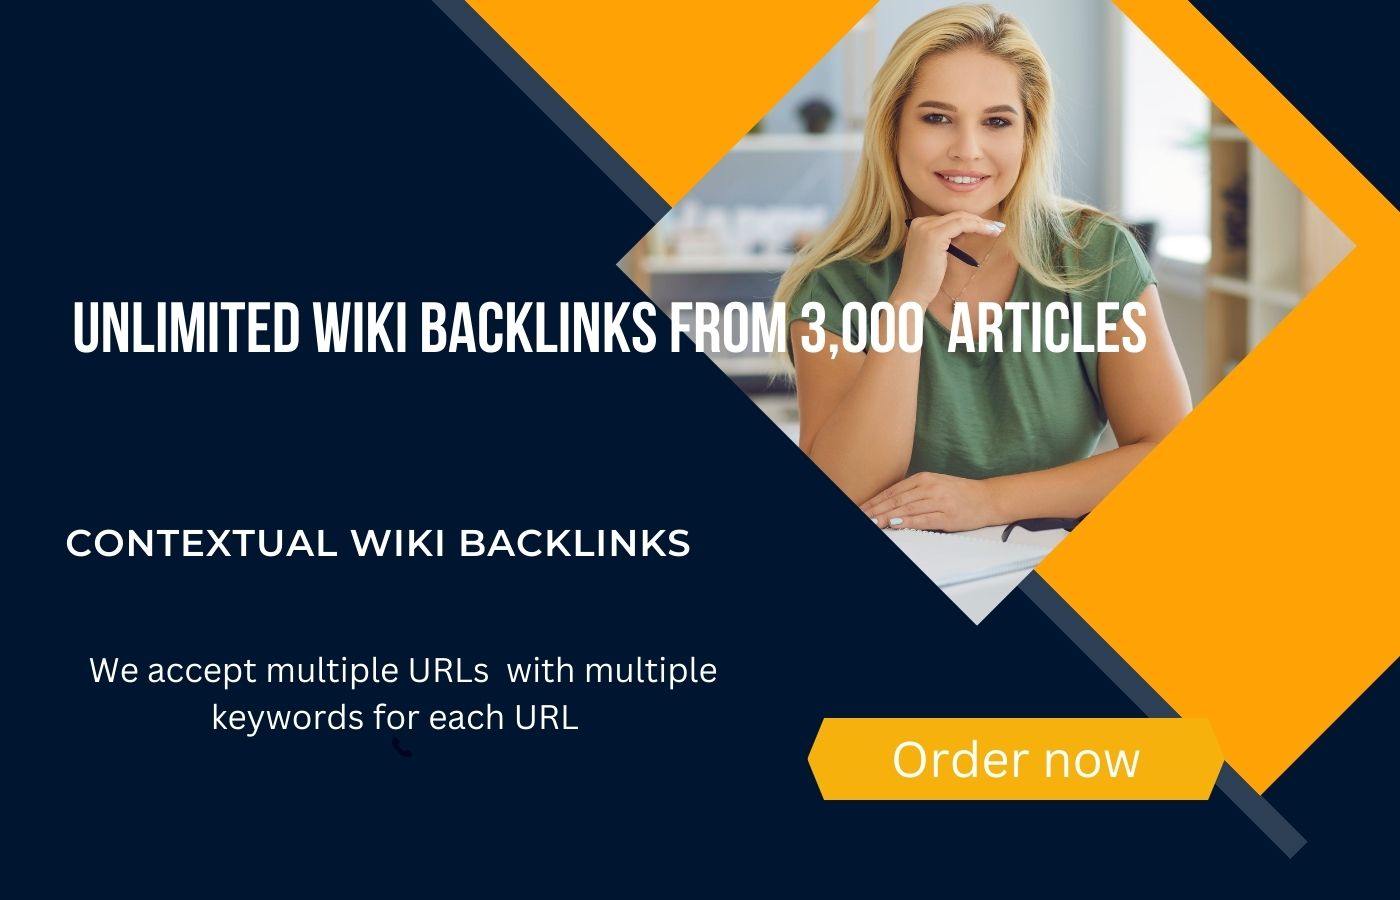 Get unlimited contextual wiki backlinks from 3,000 Wiki Articles